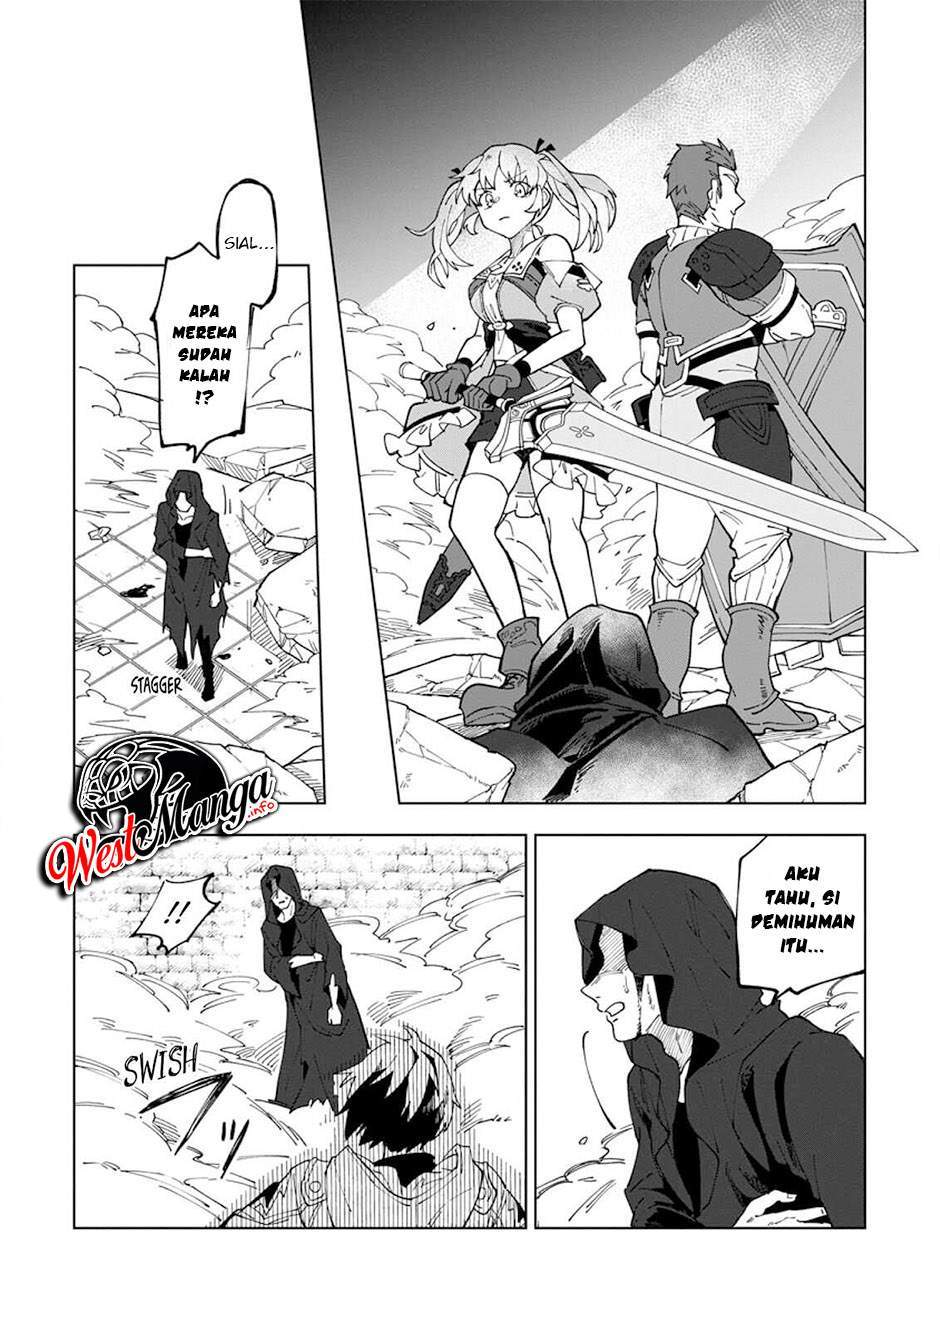 KomiknThe White Mage Who Was Banished From the Hero’s Party Is Picked up by an S Rank Adventurer ~ This White Mage Is Too Out of the Ordinary! Chapter 6